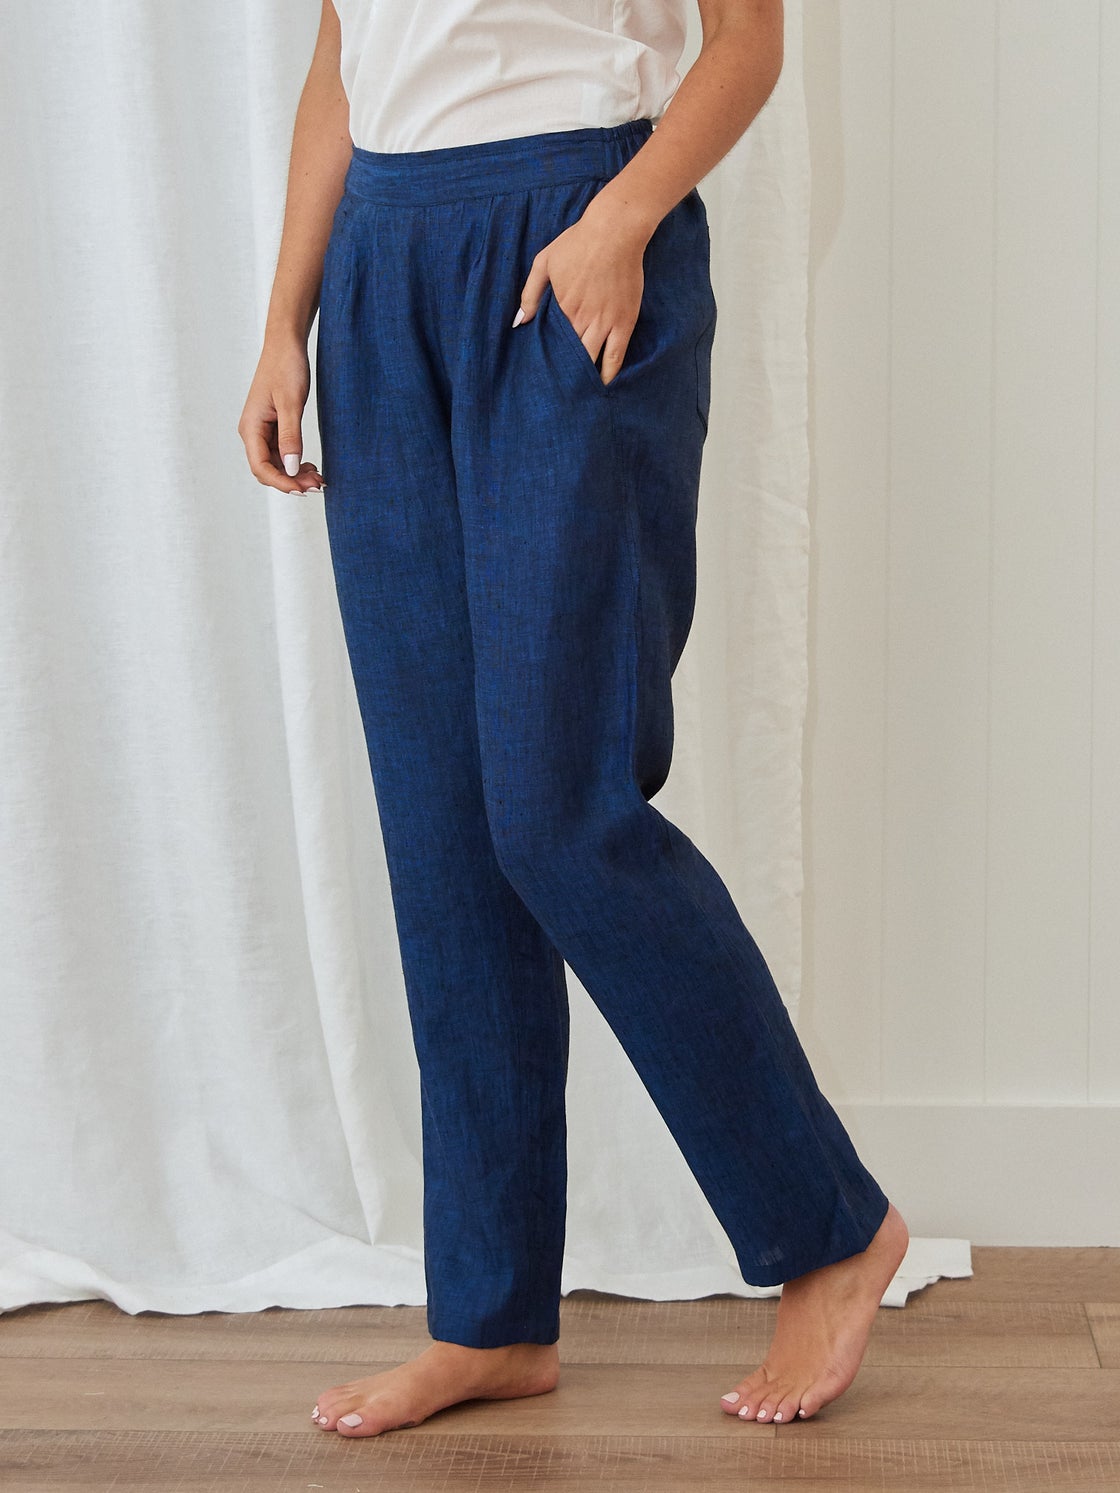 Voyager Linen Pants in Blue Chambray | Wallace Cotton NZ